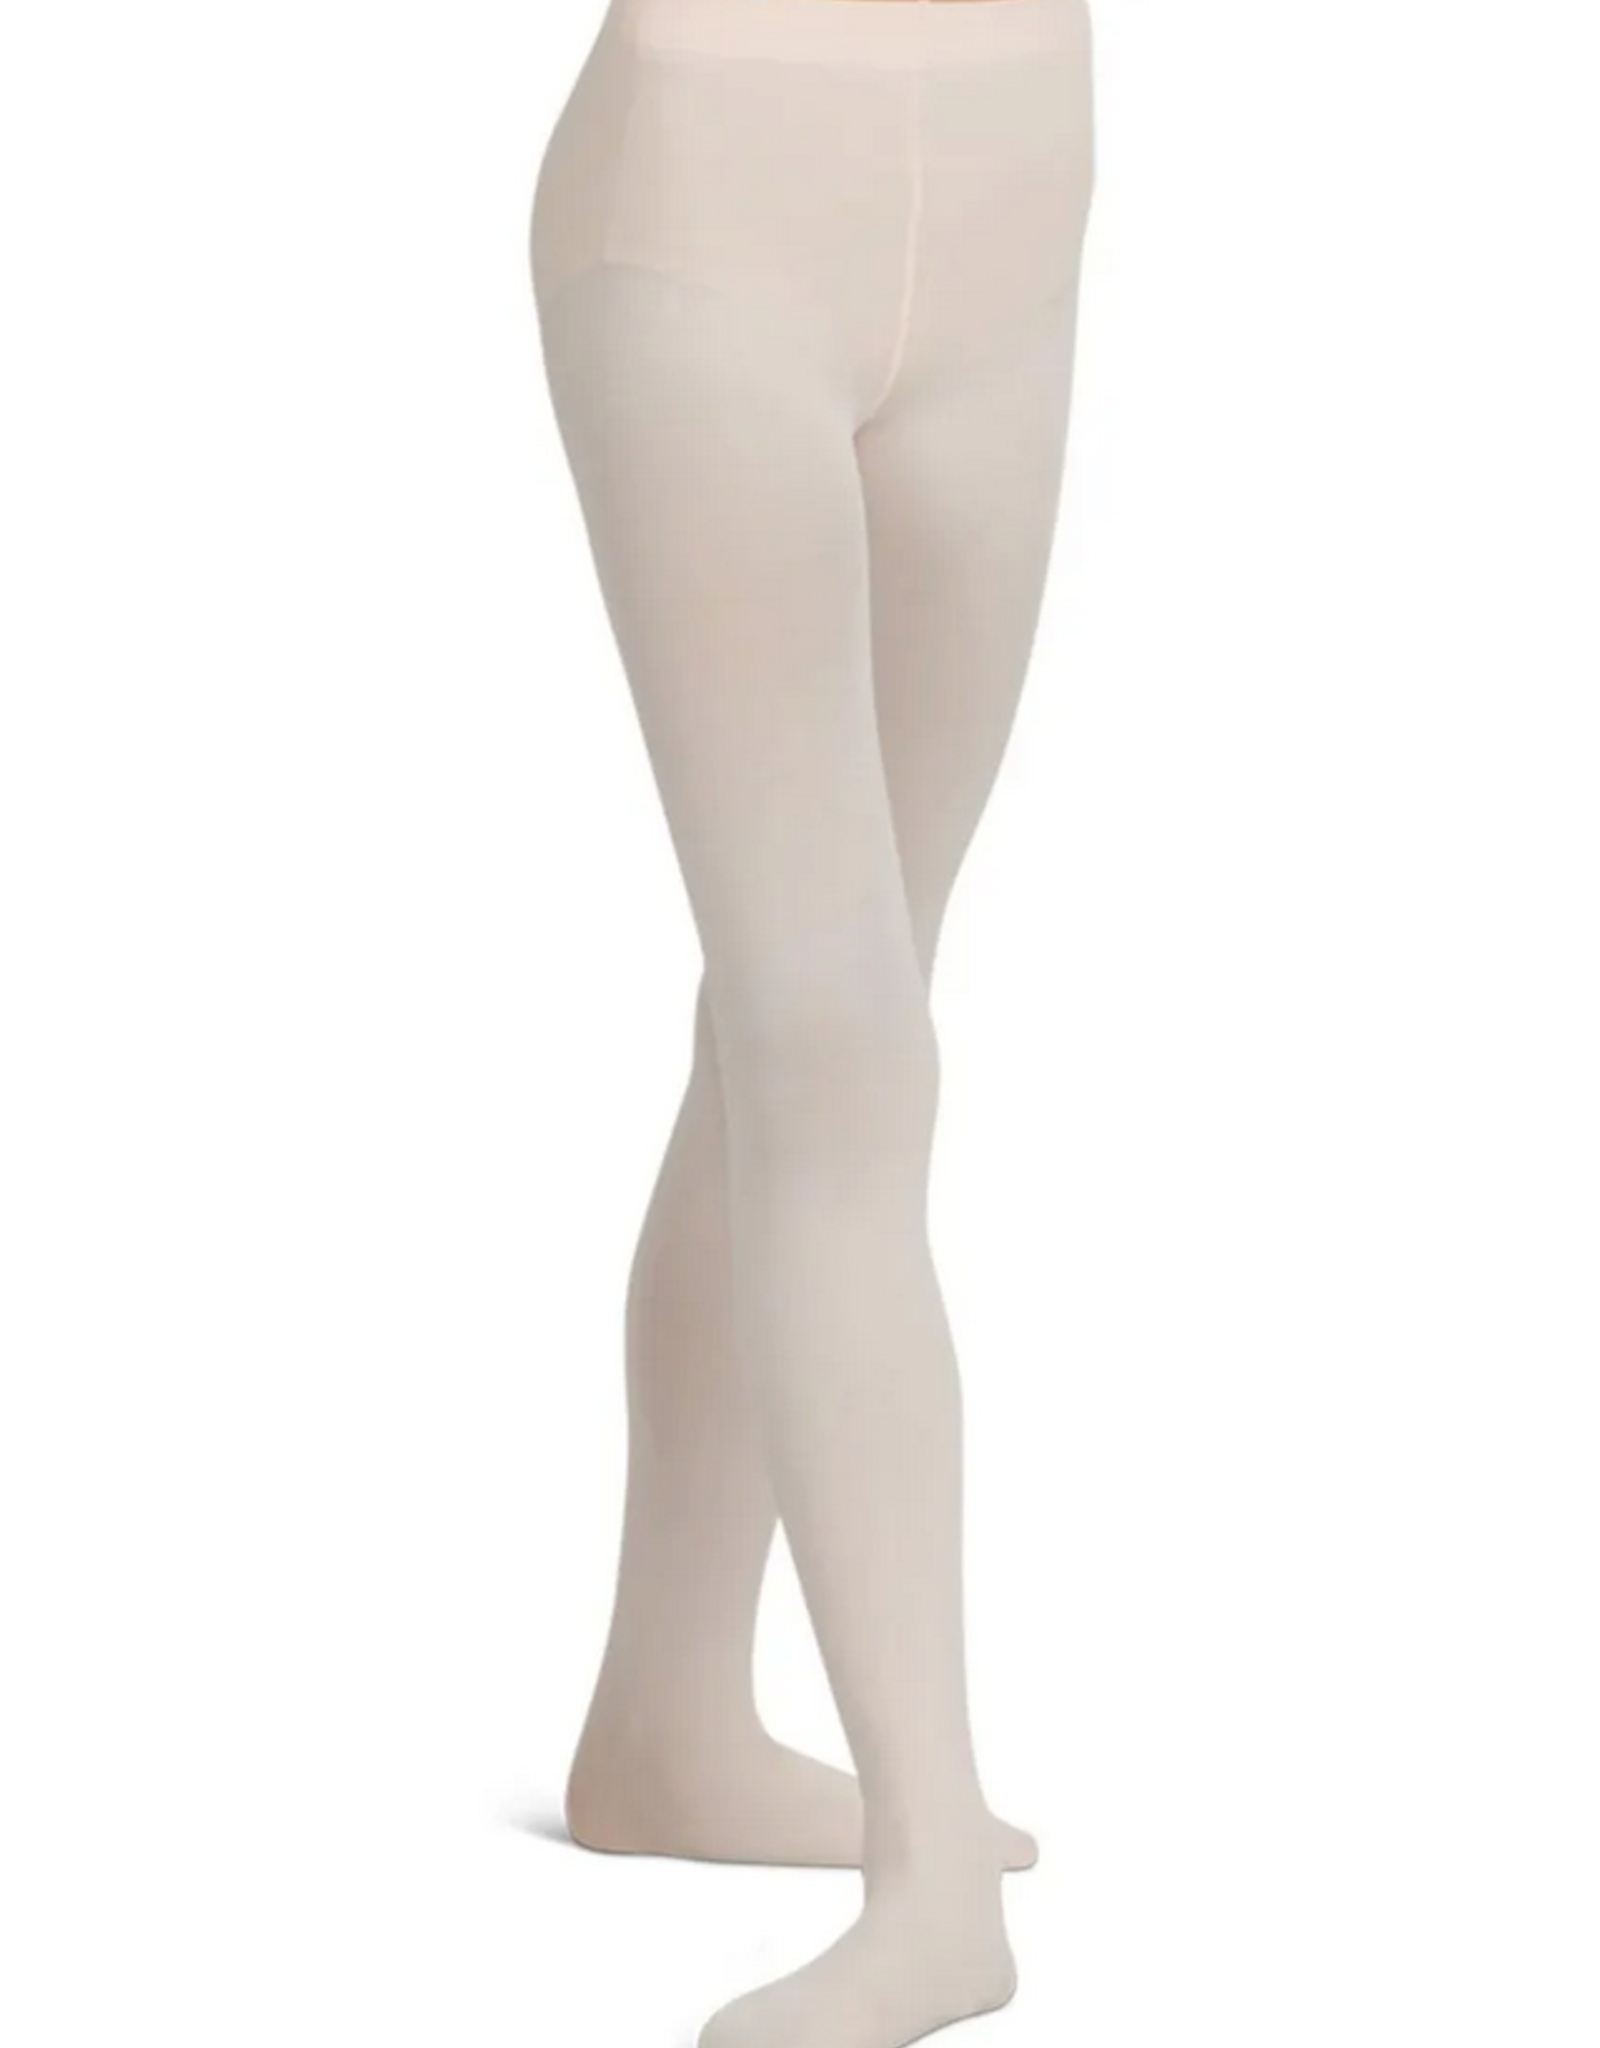 CAPEZIO ULTRA SOFT SELF KNIT WAISTBAND FOOTED TIGHT LIGHT PINK (1915)